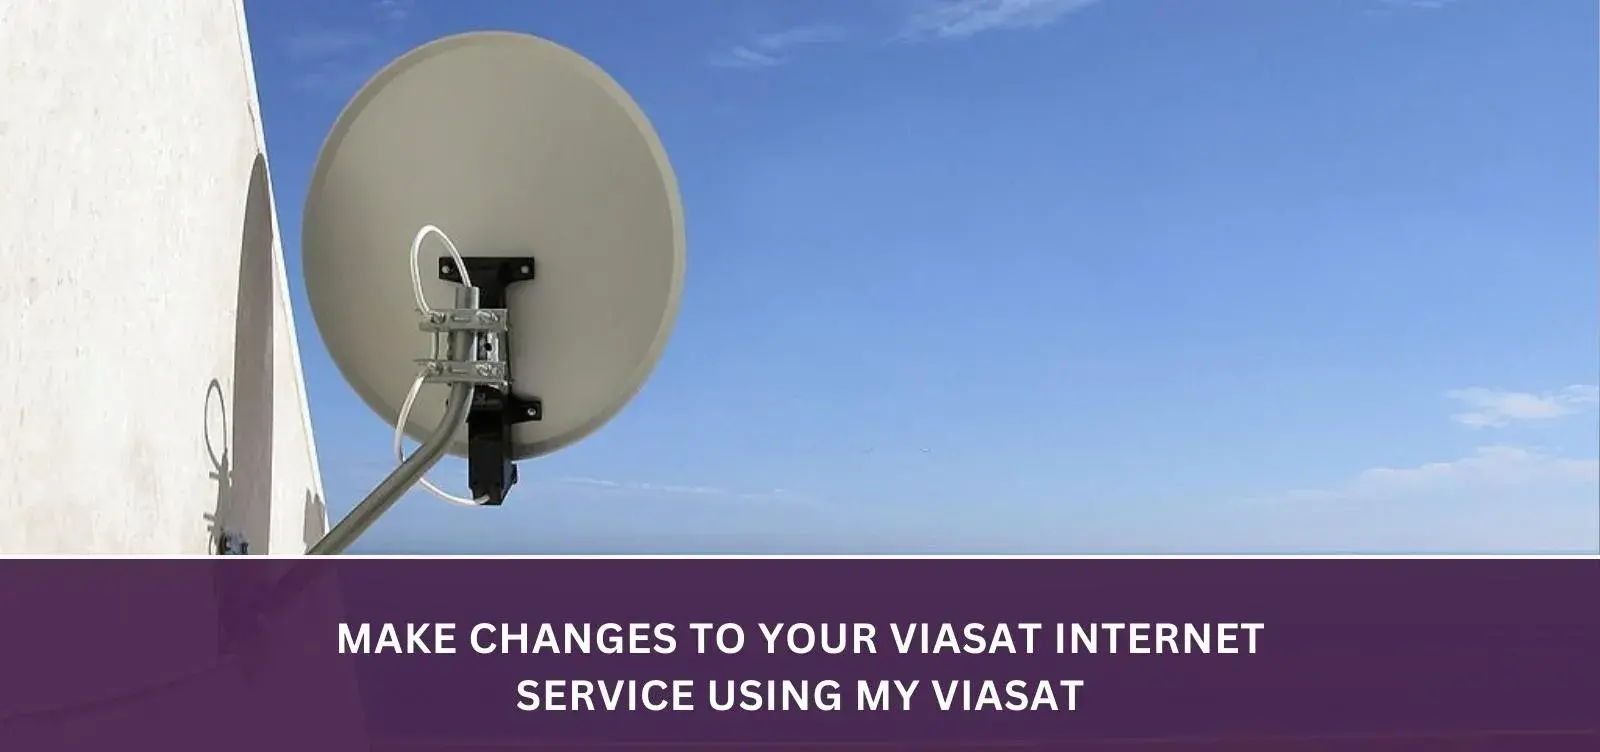 Make changes to your Viasat Internet service using My Viasat